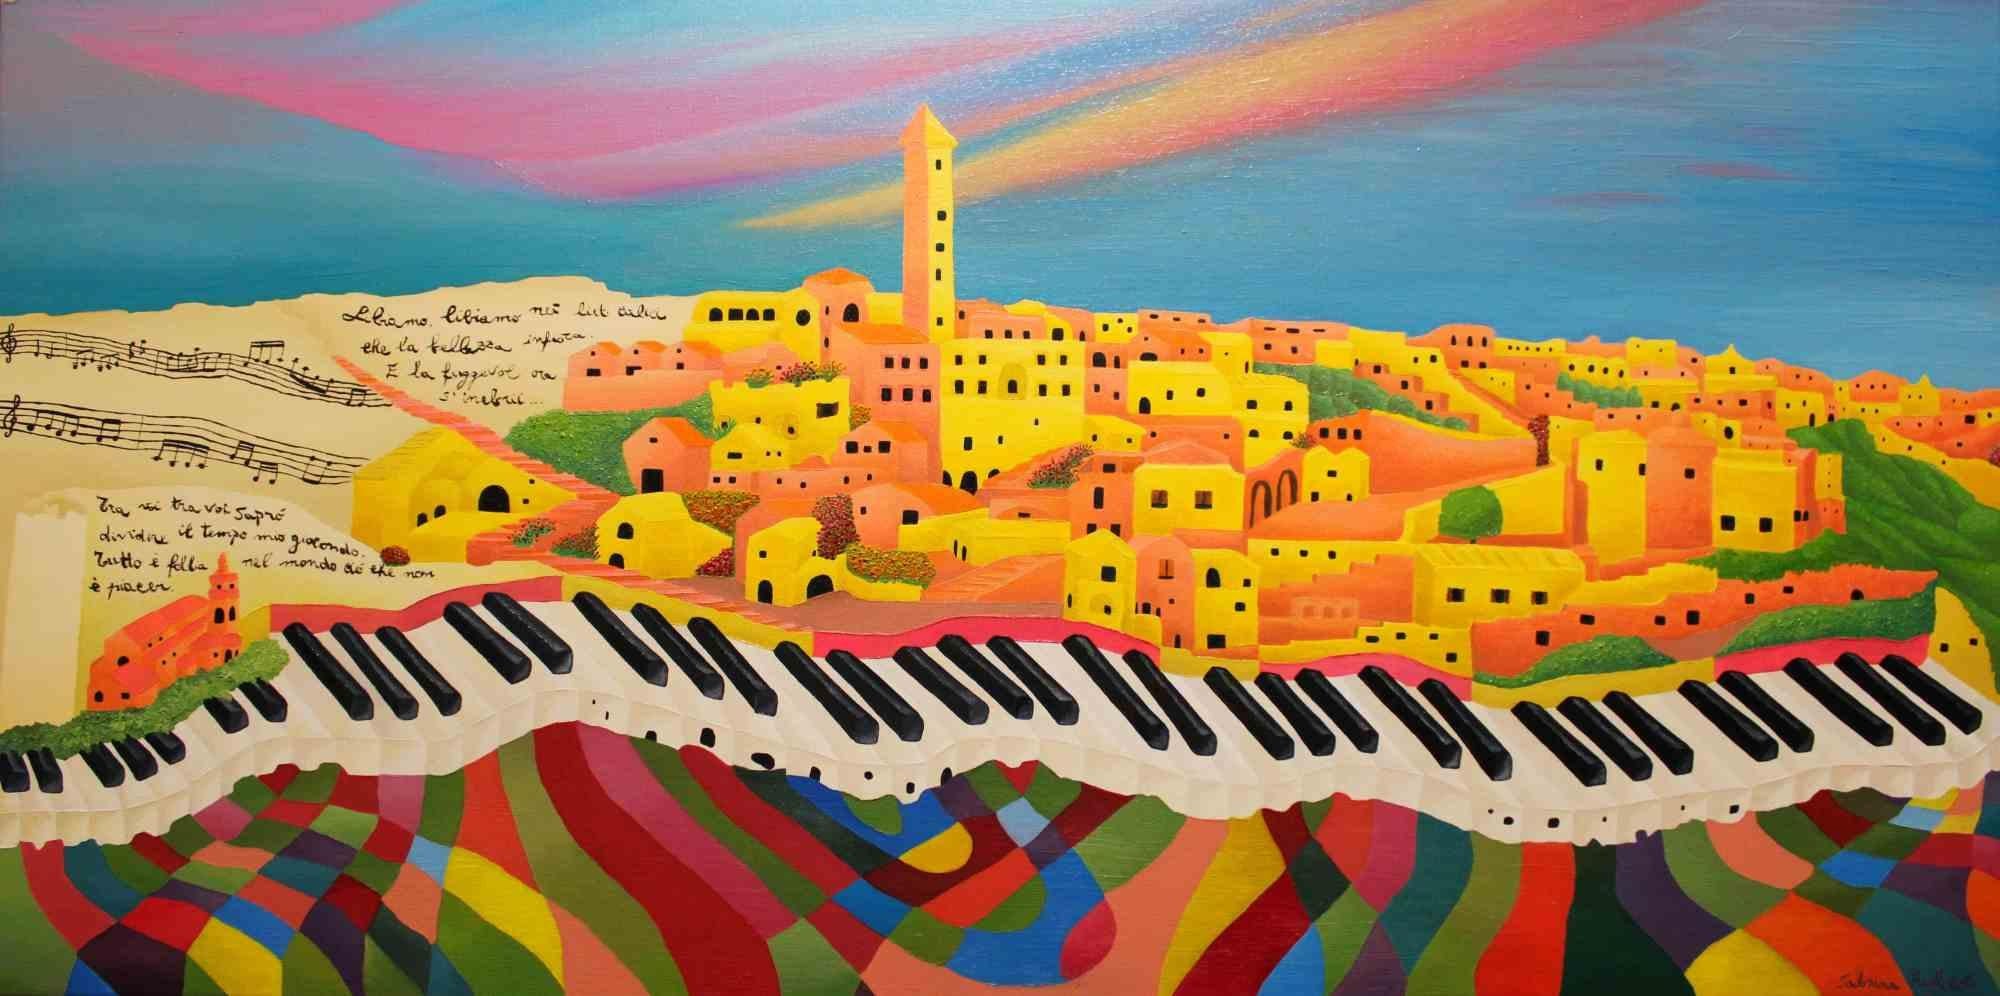 Libiamo in Matera - Oil Painting on Canvas by Sabrina Pugliese - 2019